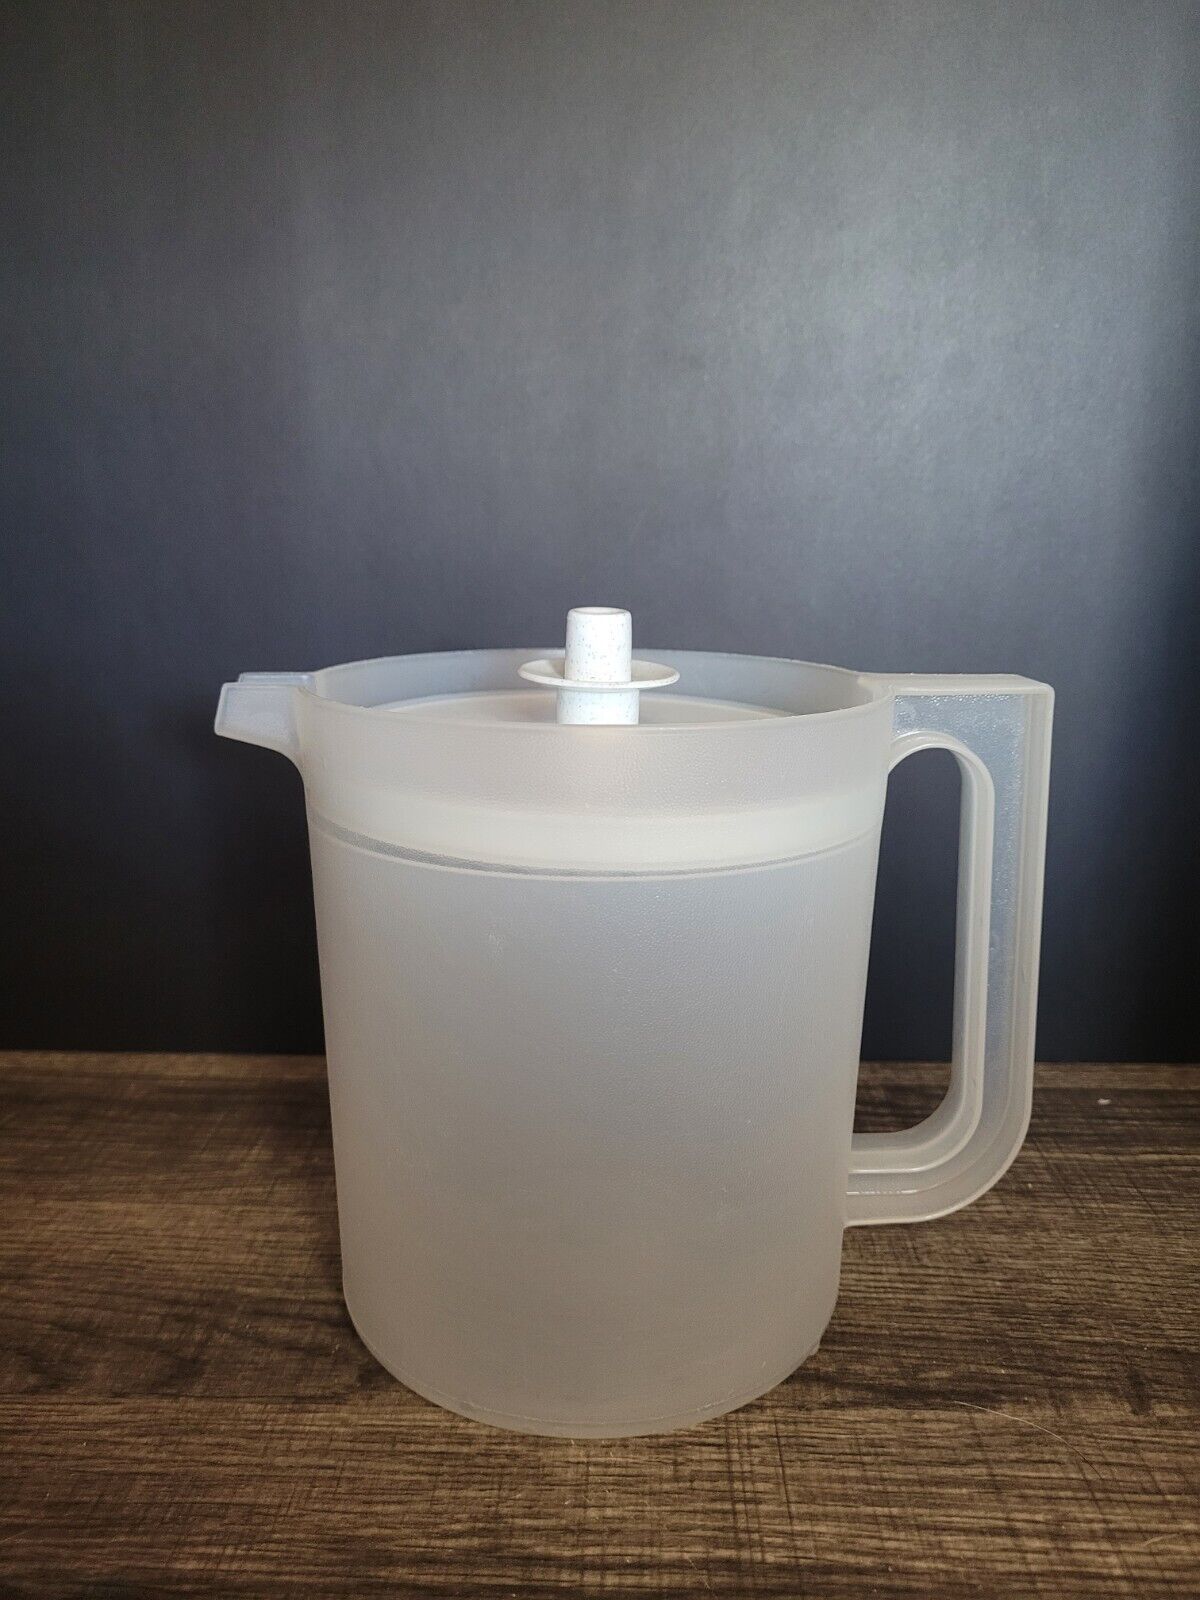 Vintage 1-1/2 Qt. Sheer Tupperware Pitcher #1575 with White/gray Push-button Lid